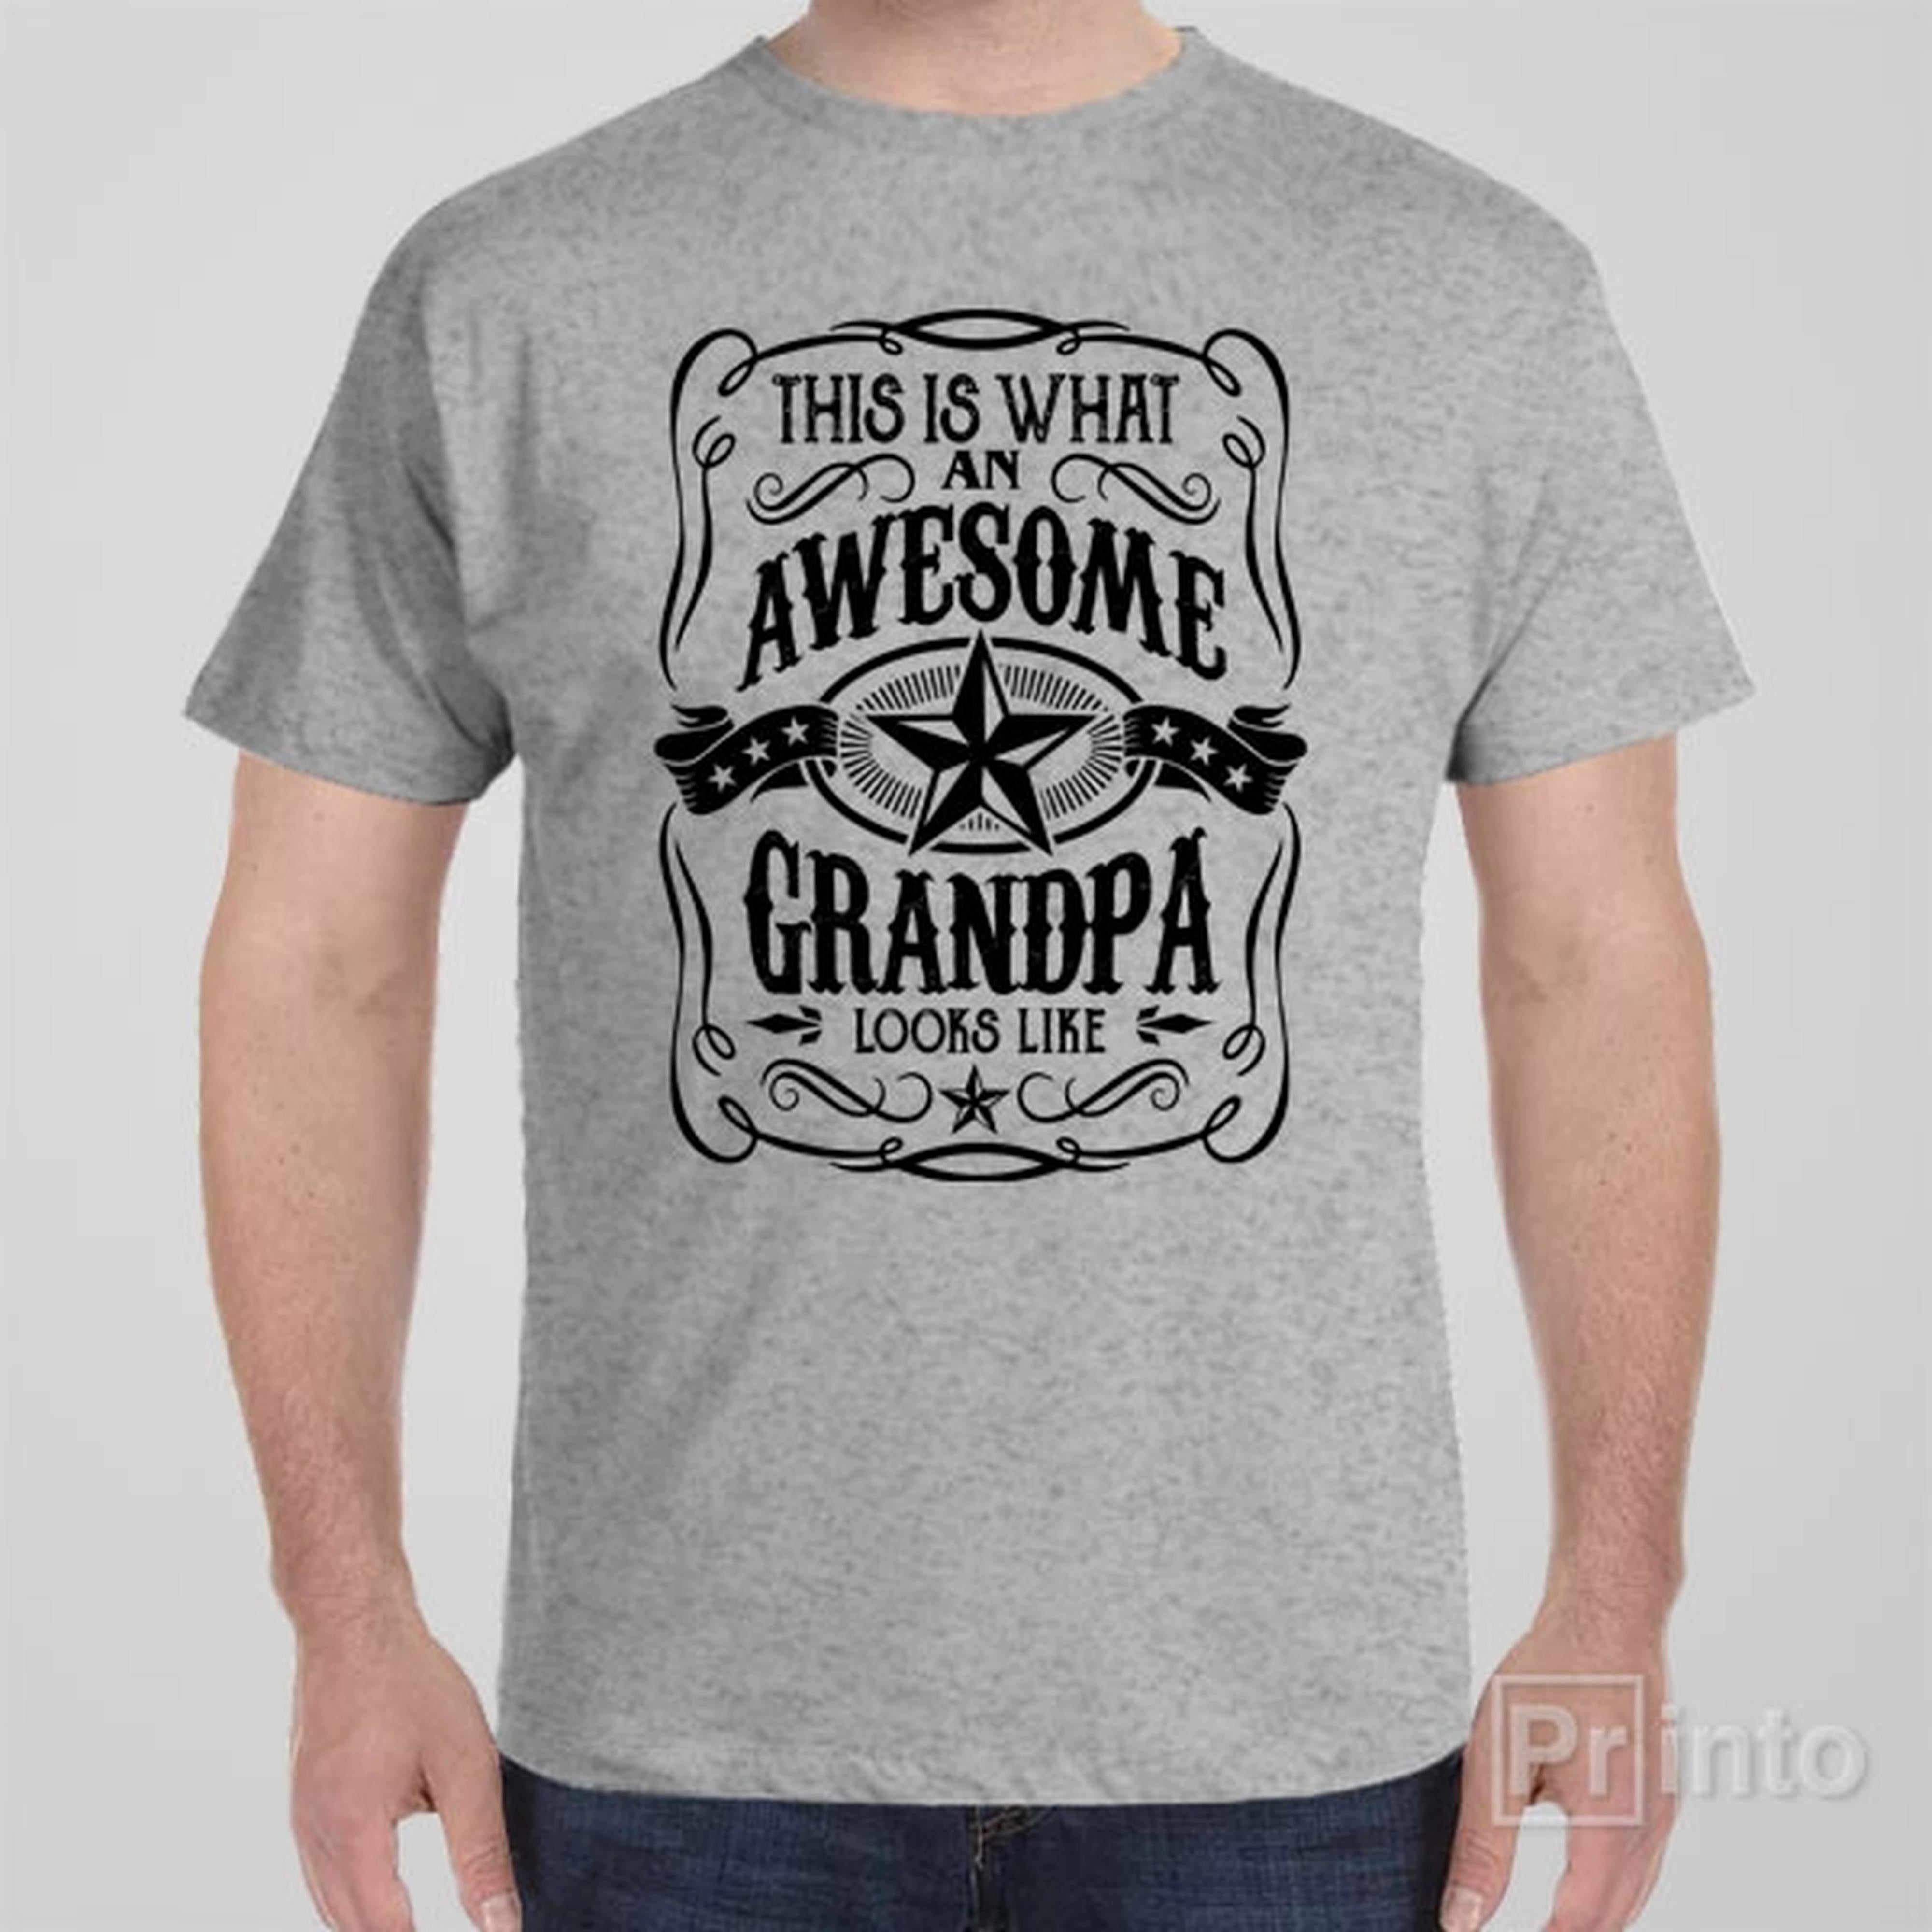 this-is-what-an-awesome-grandpa-looks-like-t-shirt